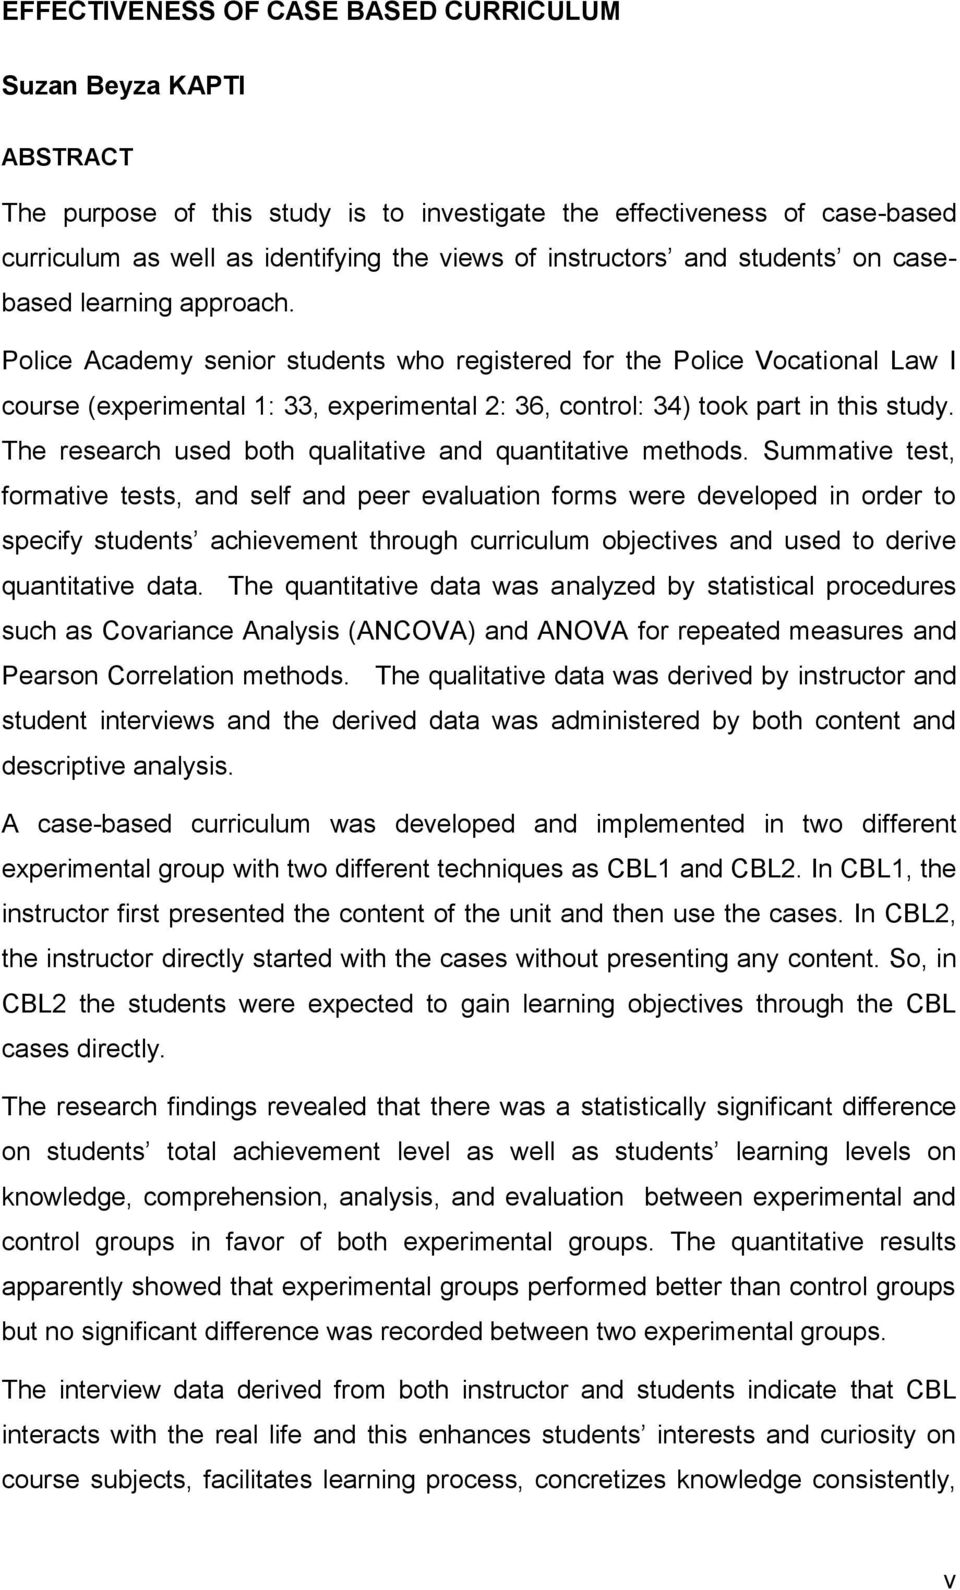 Police Academy senior students who registered for the Police Vocational Law I course (experimental 1: 33, experimental 2: 36, control: 34) took part in this study.